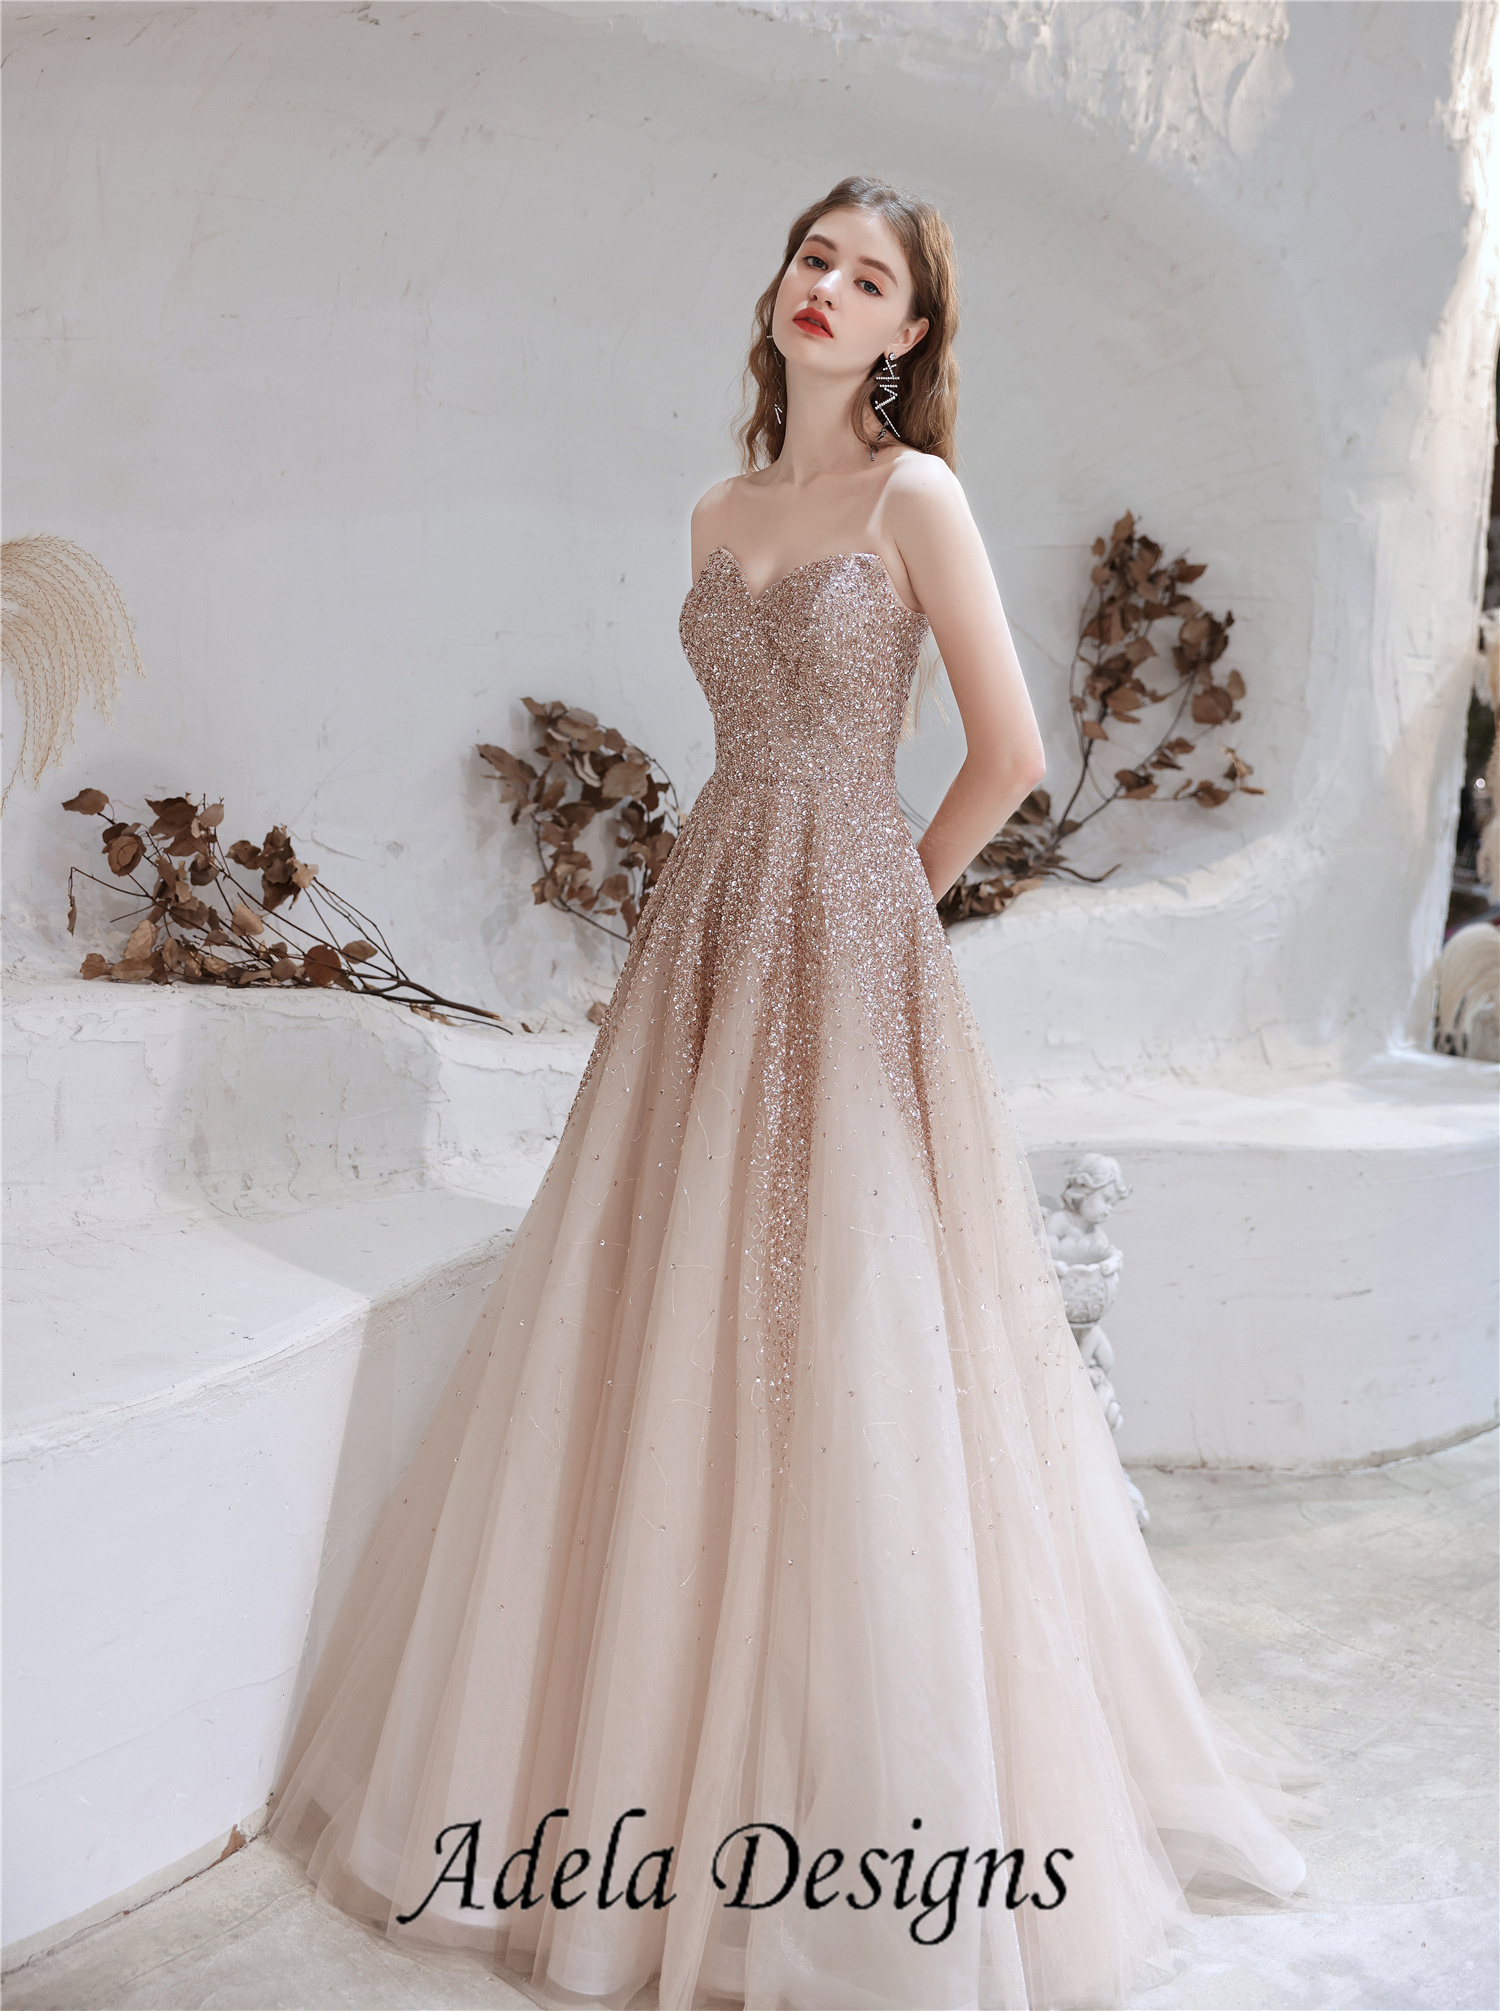 Rose Gold Heavily Beading Tulle Prom Dress With Detachable Cape – Adela ...